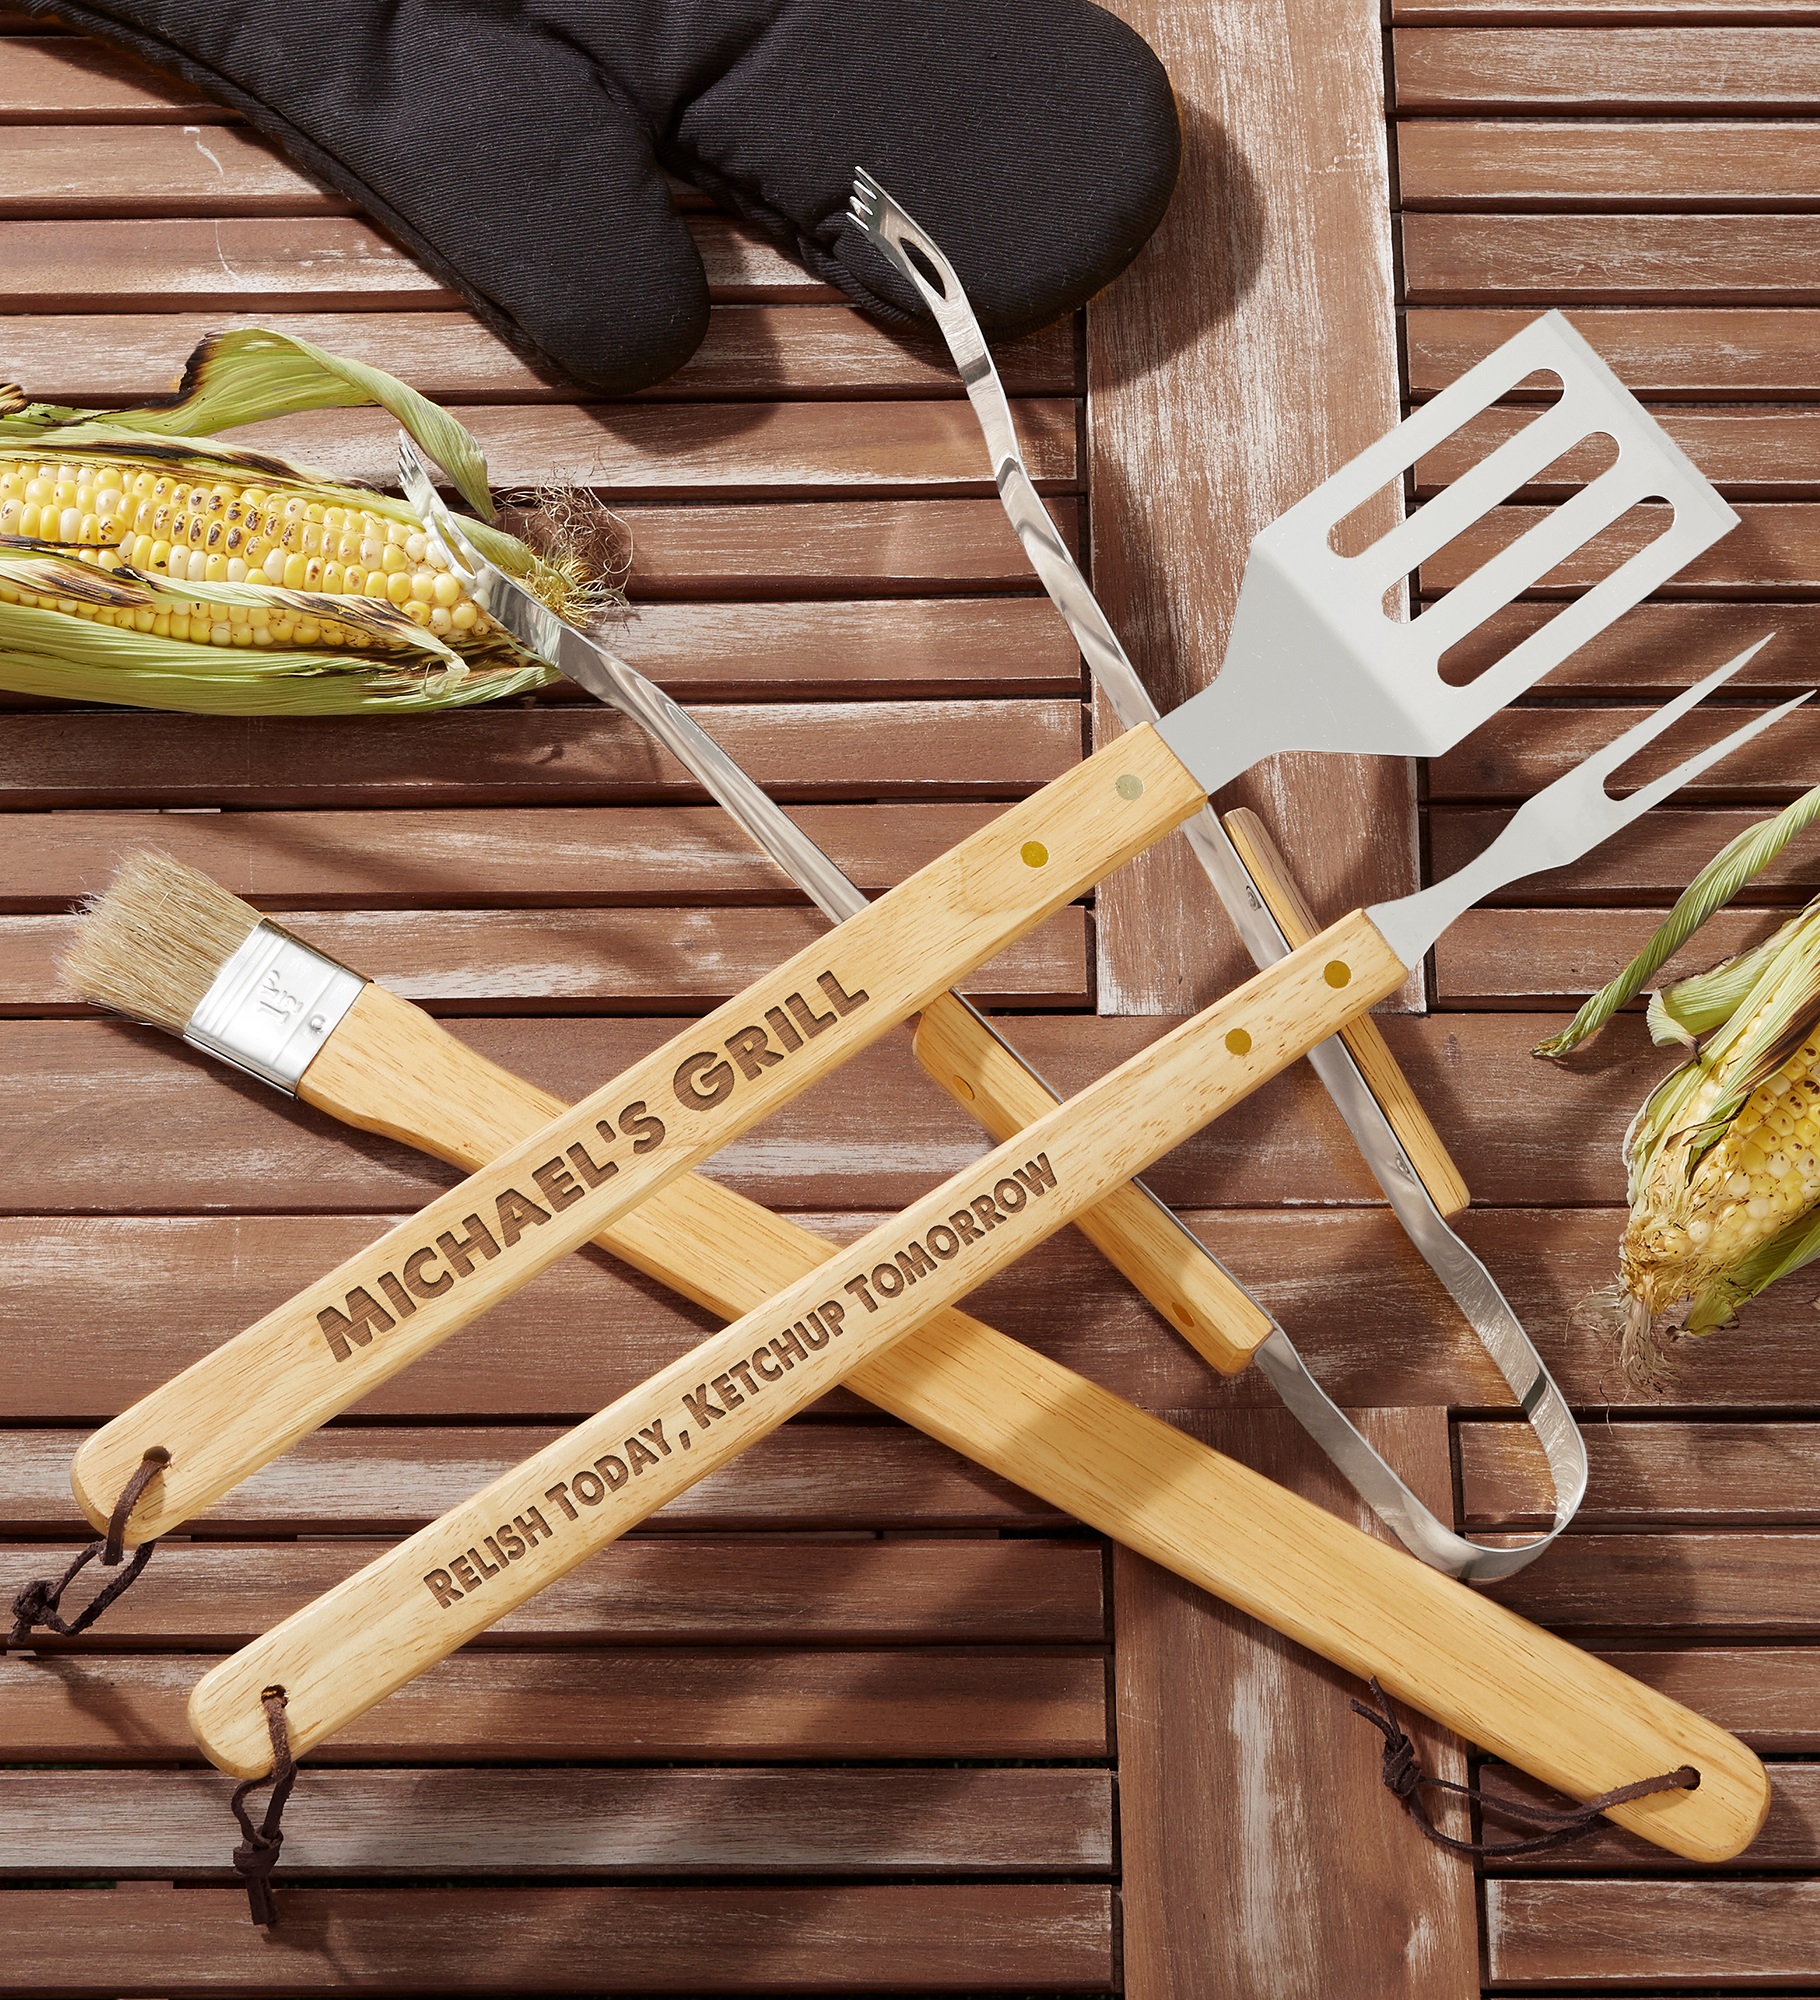 You Name It! Personalized BBQ Utensil Set